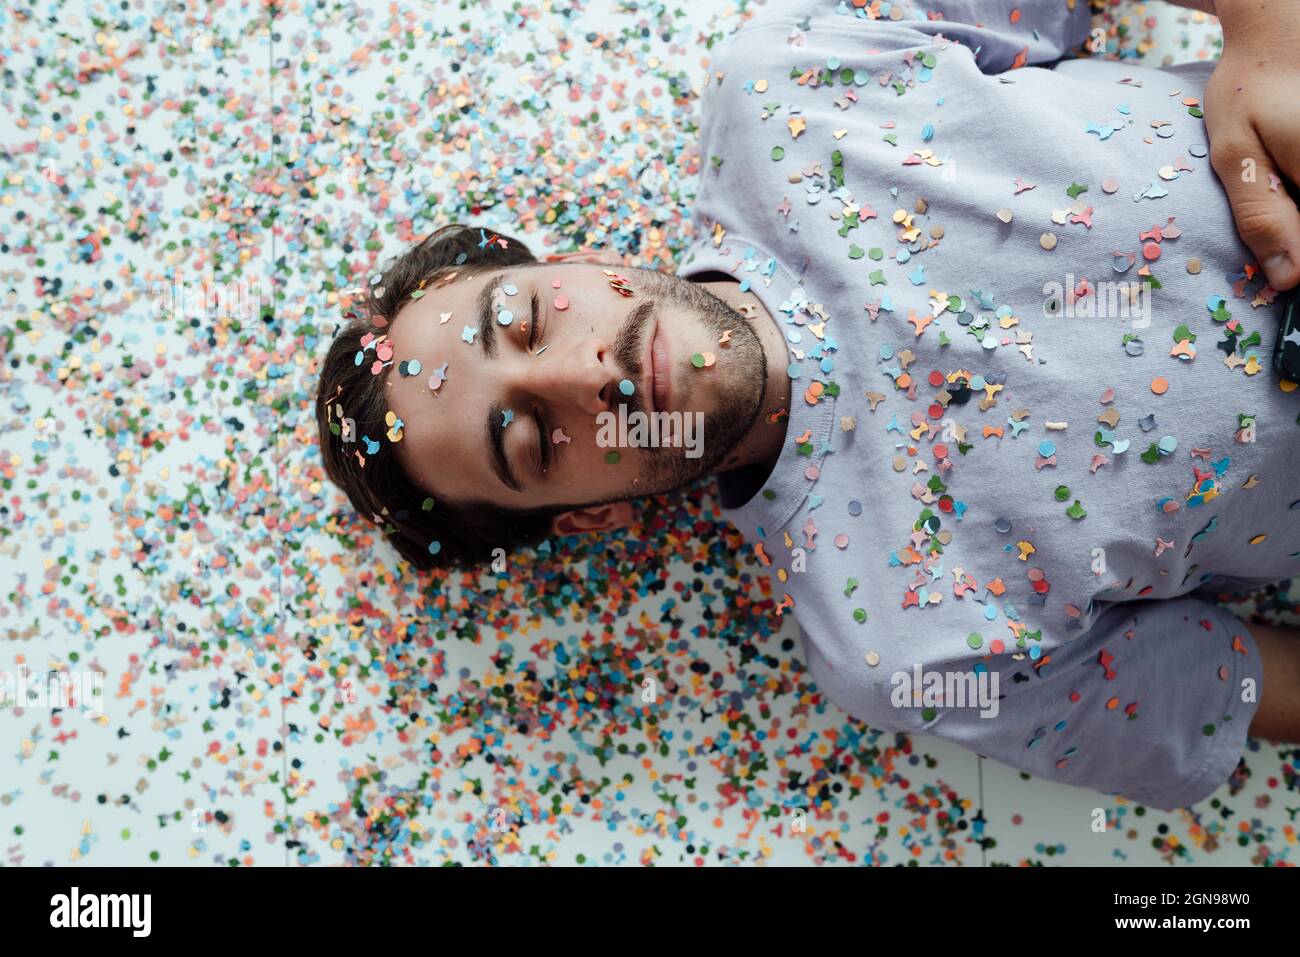 Man's face covered with confetti relaxing on floor Stock Photo